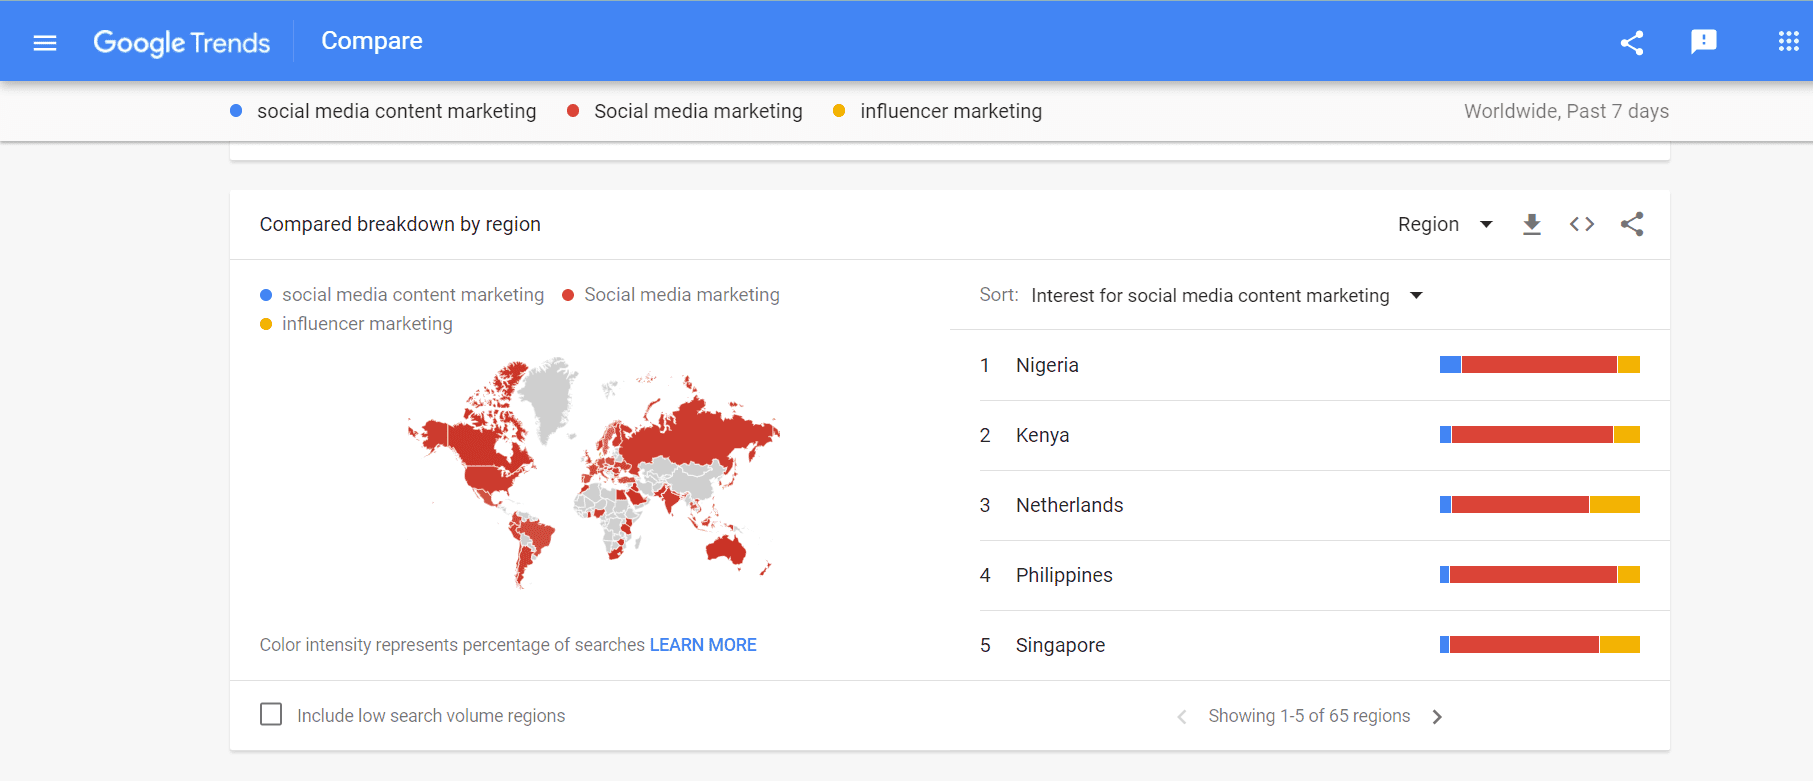 Compared breakdown of Google search trends by region for three different keywords